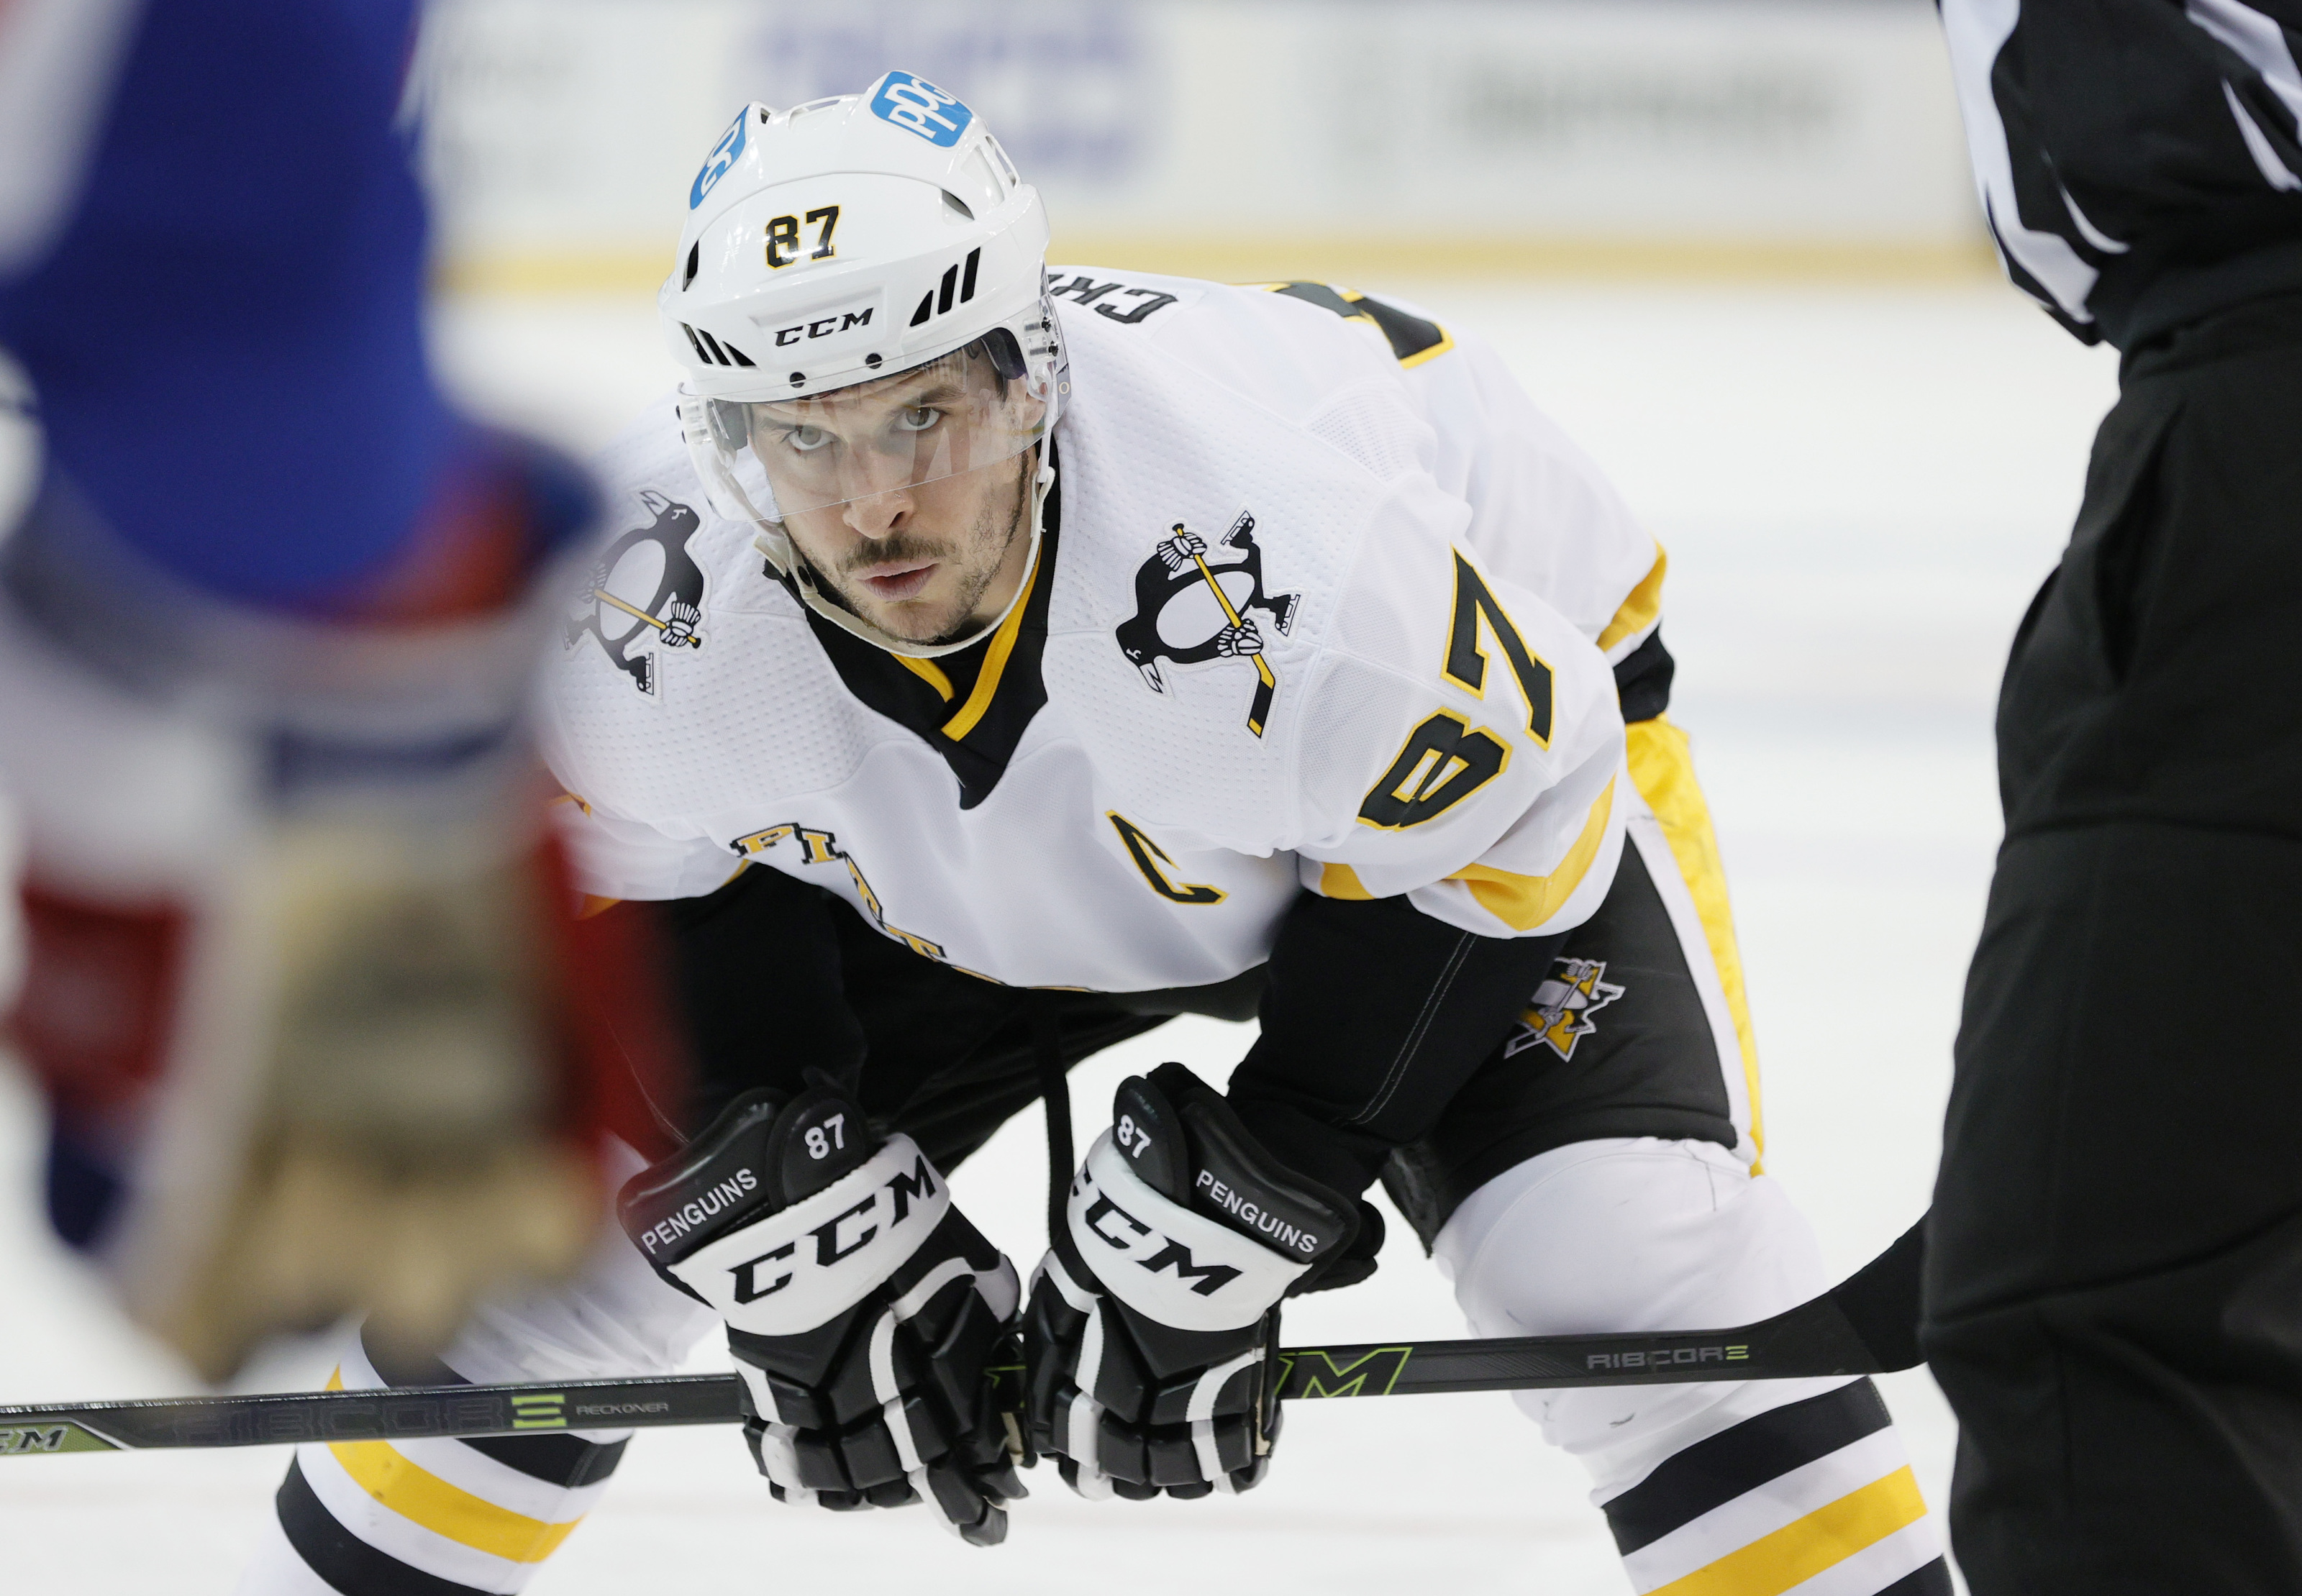 Sidney Crosby proving his value yet again